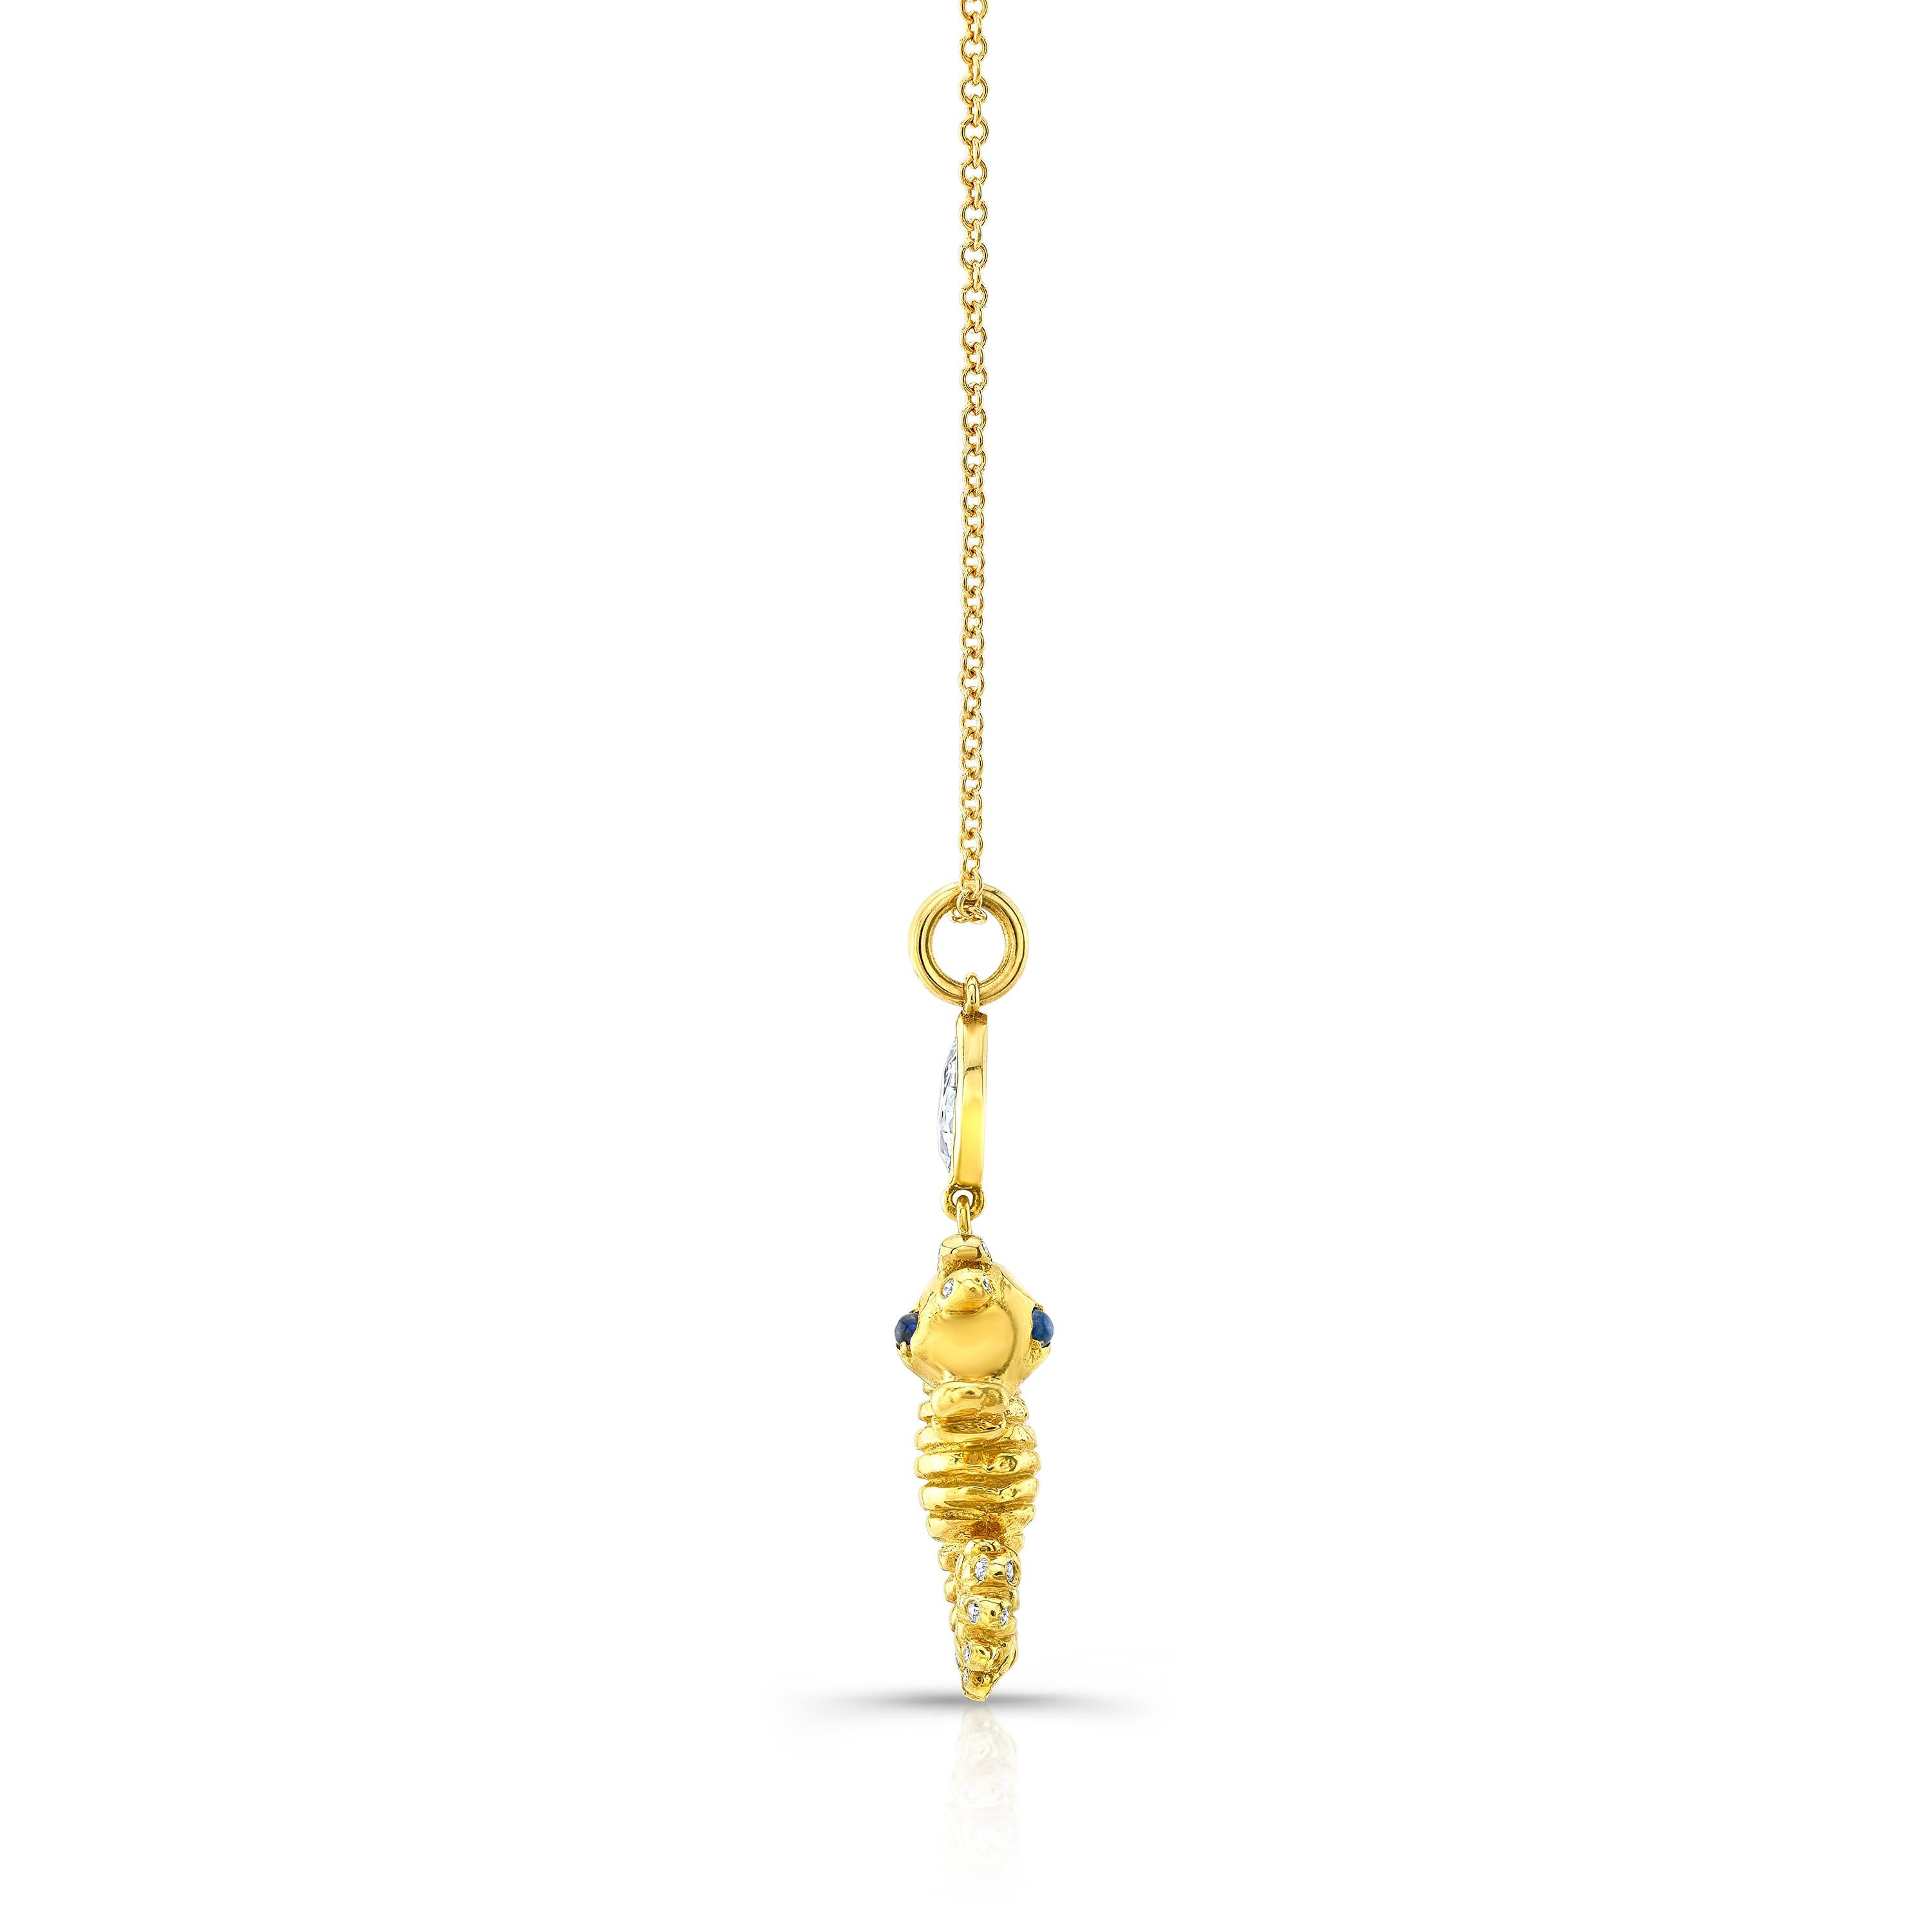 
Amy Y's 18K-yellow gold and diamond contemporary designed one-of-a-kind seahorse Aria is a wondrous replica of the beautiful seahorses from the deep blue seas around the world. Reminiscence of Amy's sea adventures with her siblings off the coast of